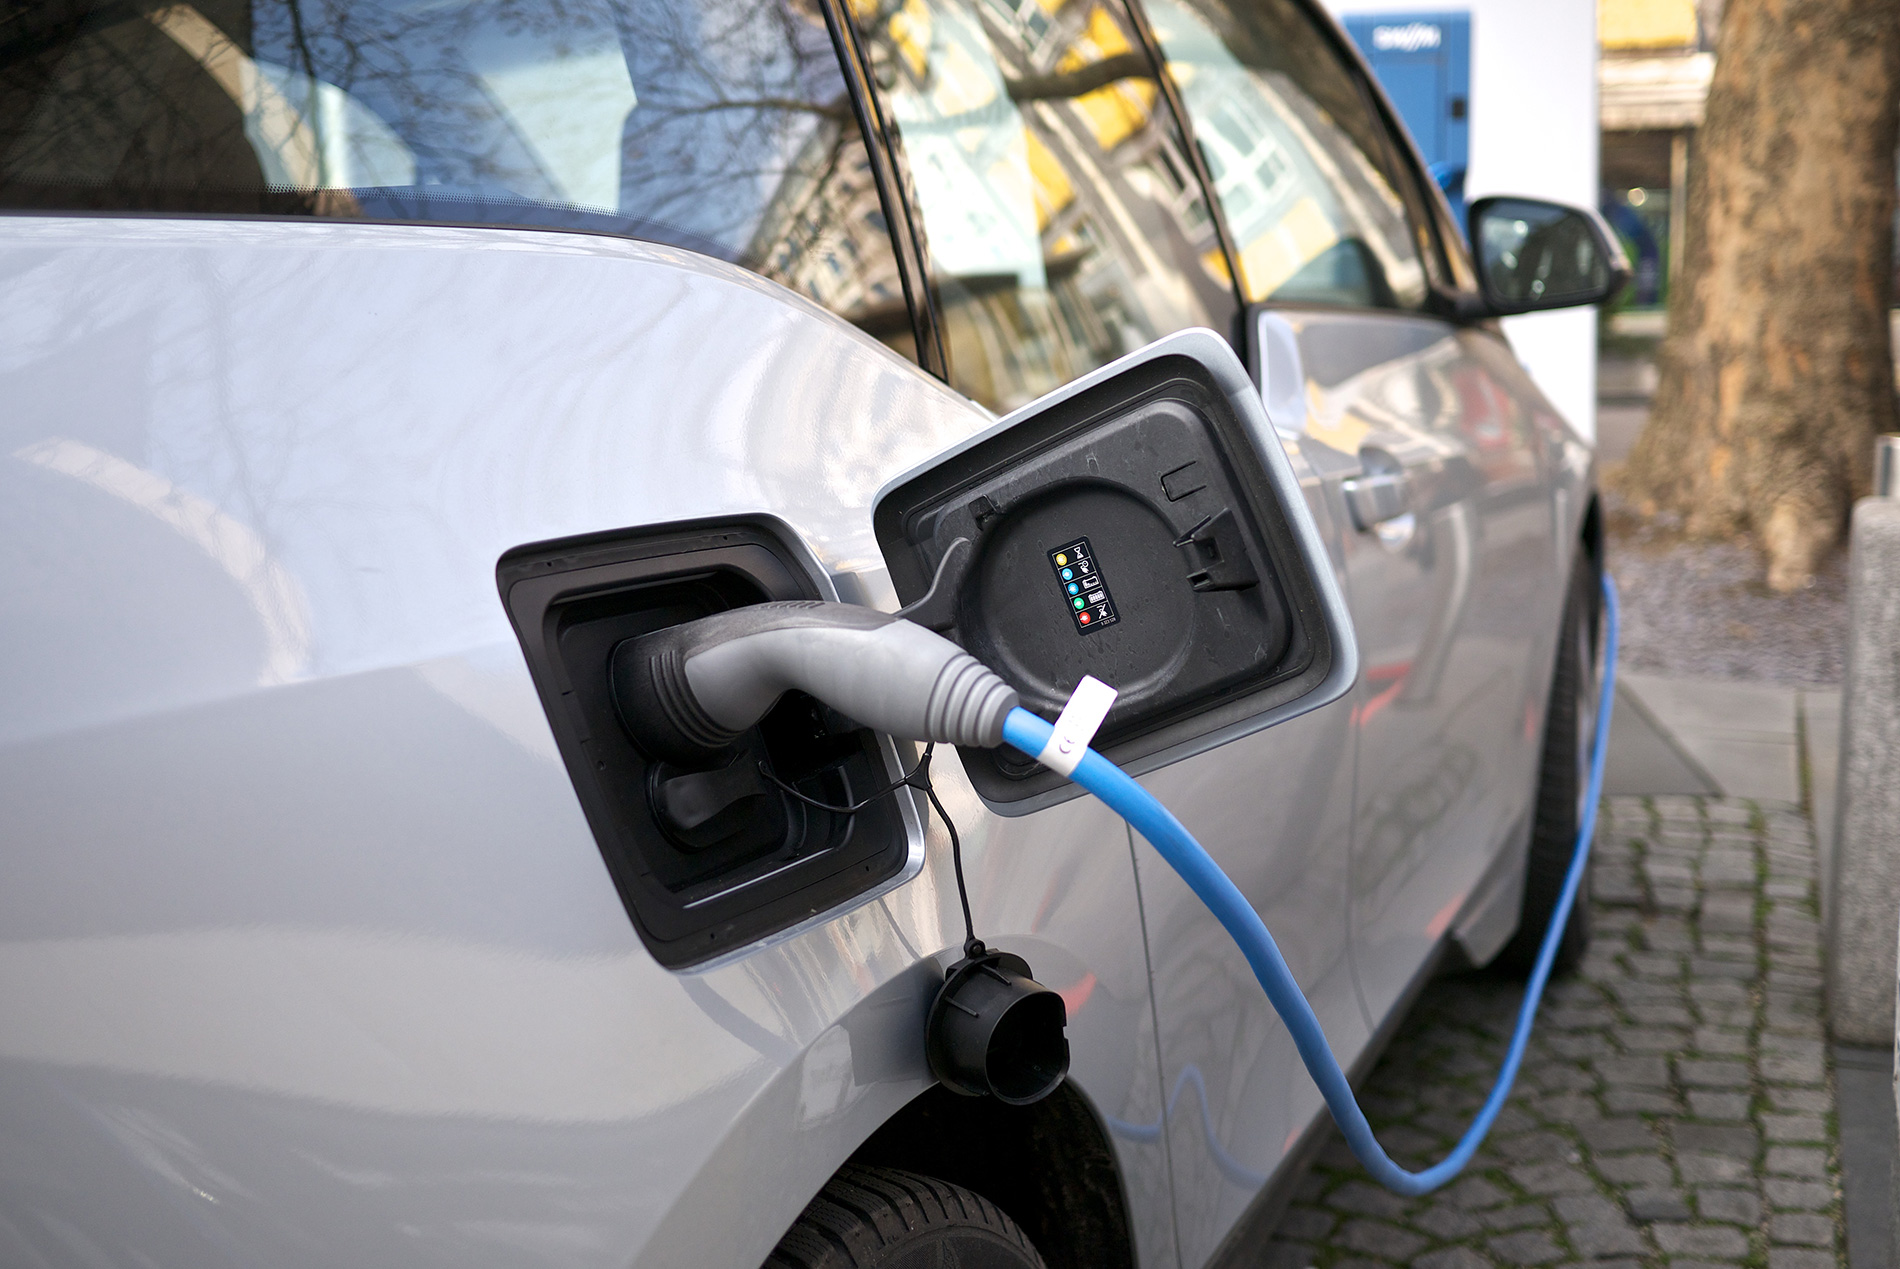 New Step To Make Electric Vehicles Rs 2.5 Lakh Cheaper: 5 Things You Need to Know